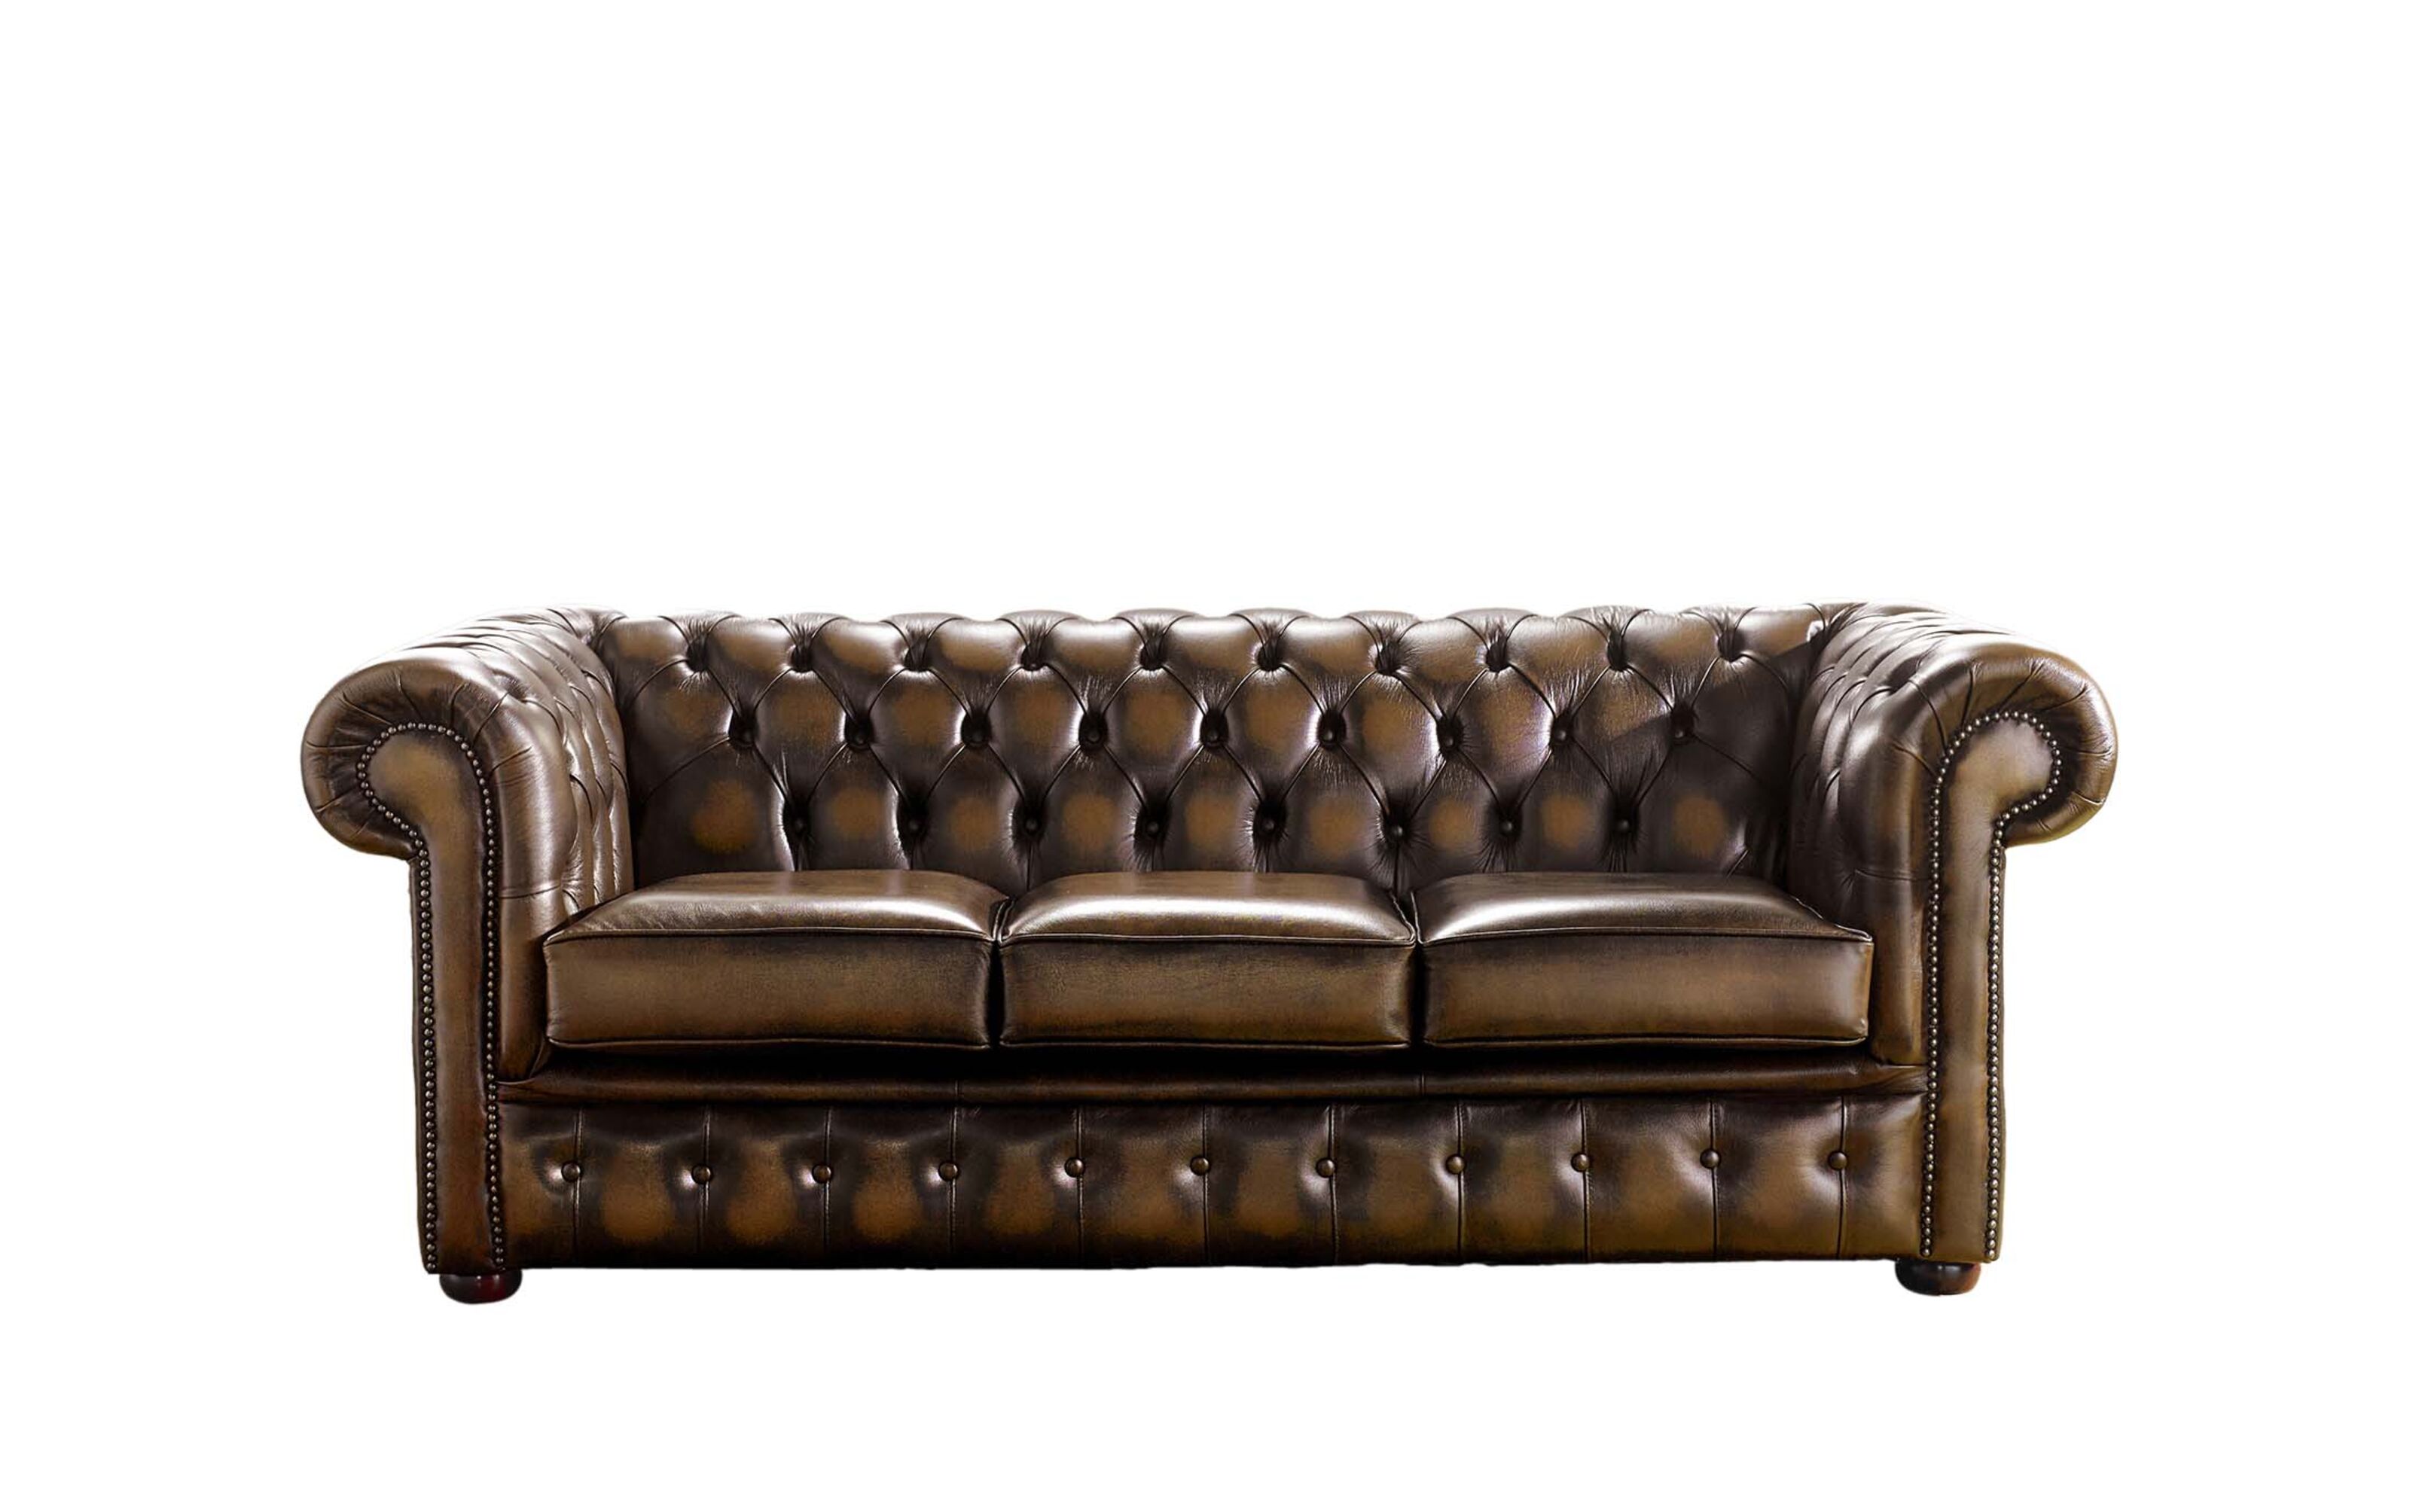 Finding Nearby Chesterfield Sofa Showrooms Explore Timeless Elegance Up Close  %Post Title